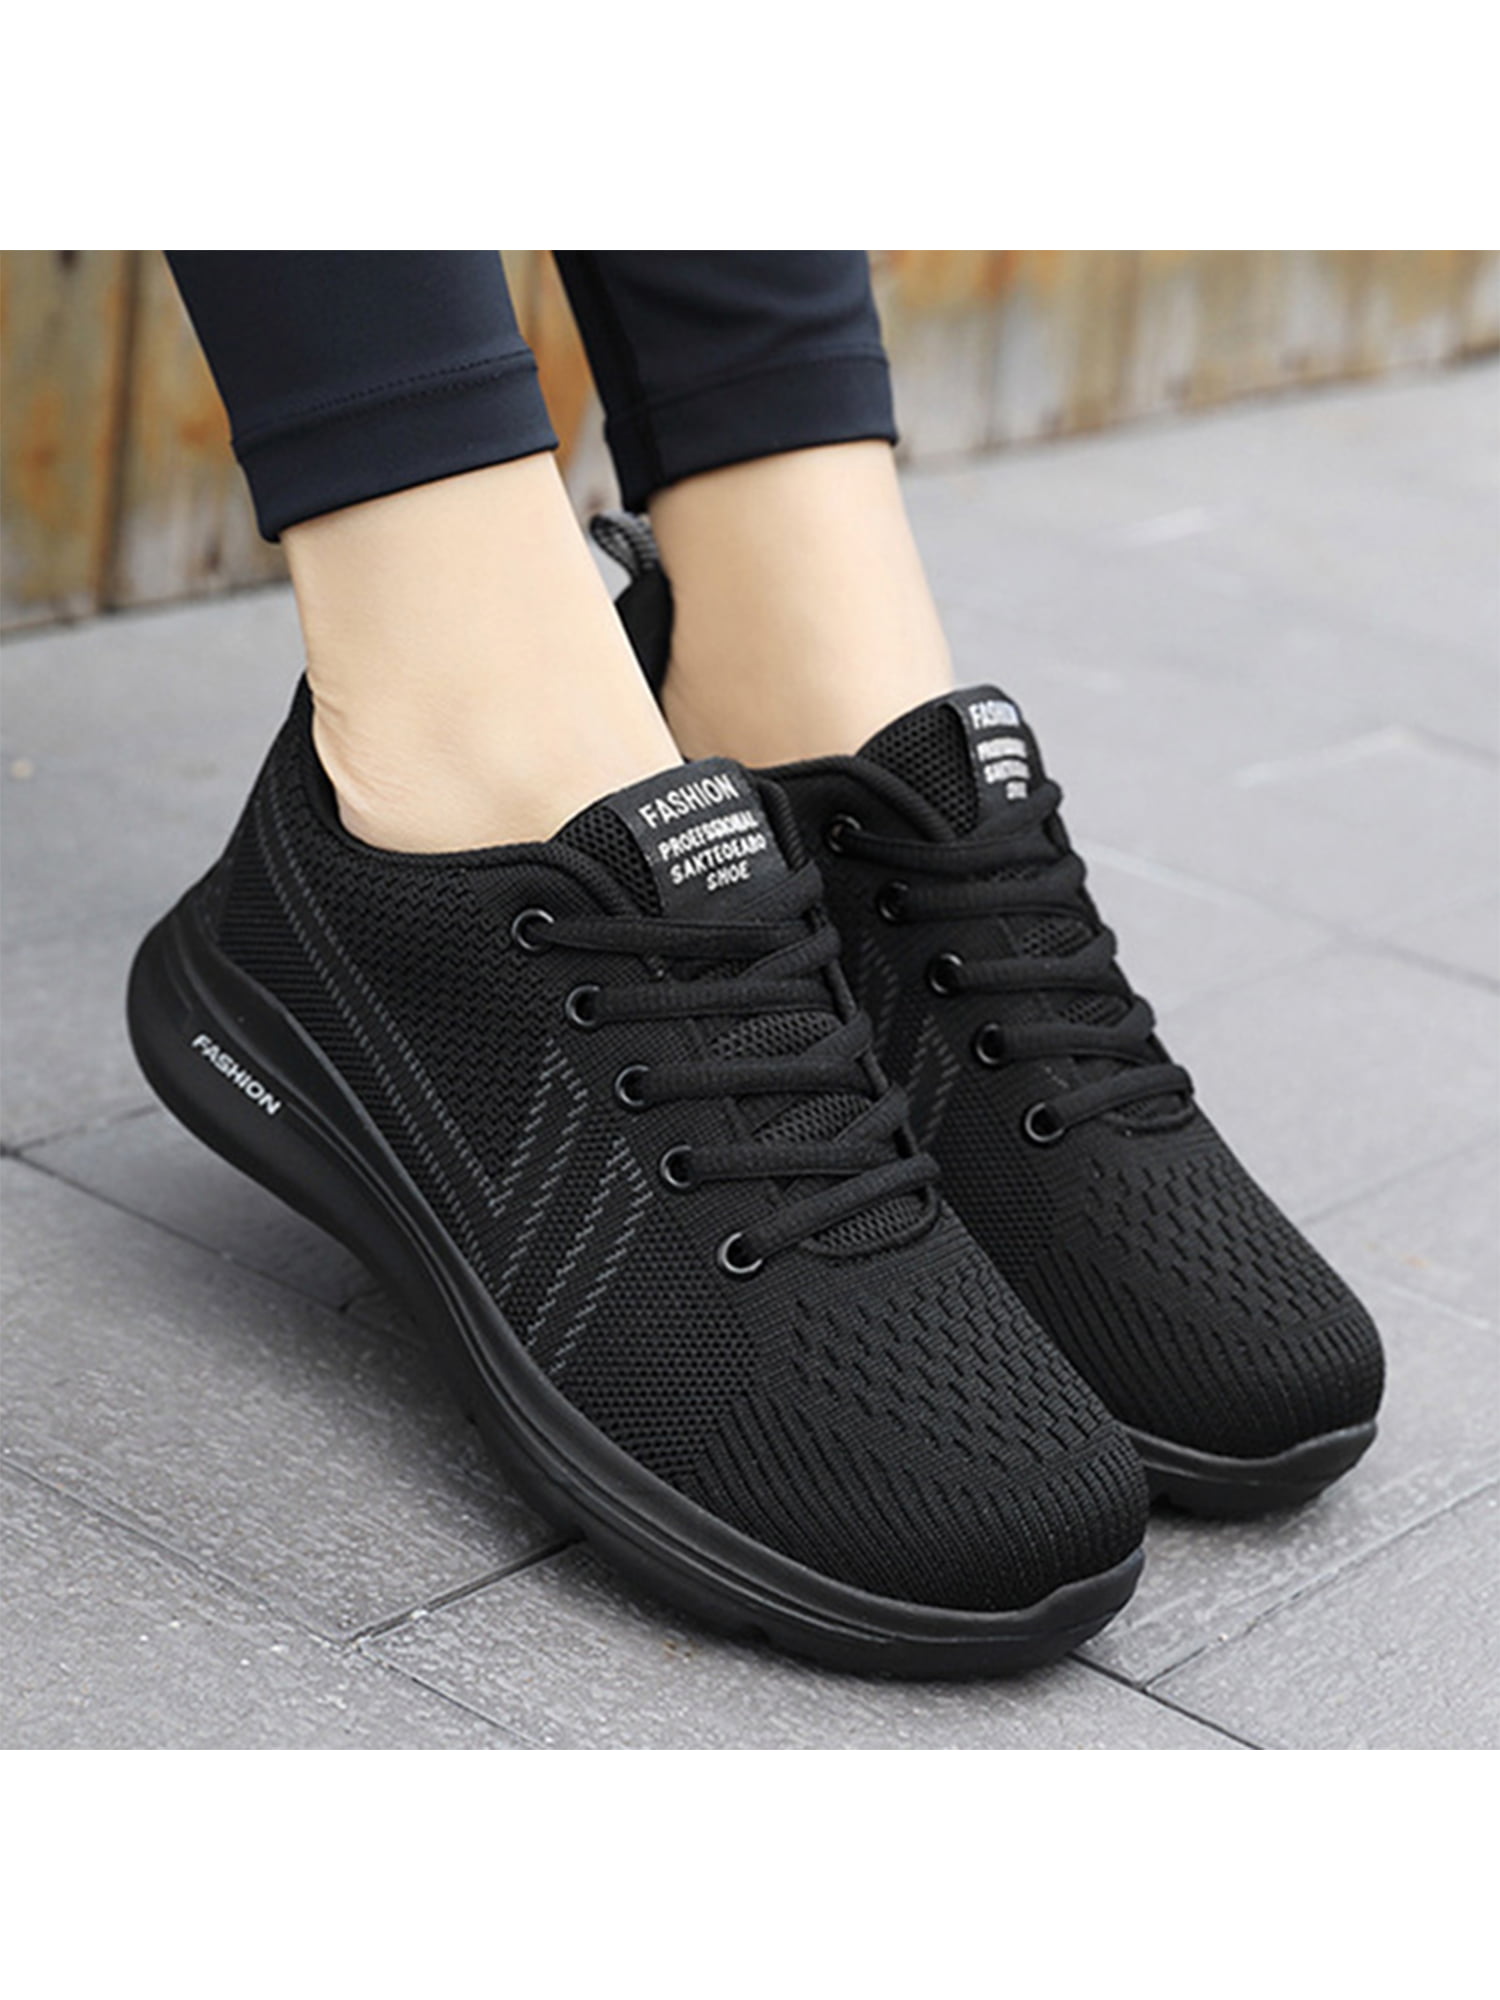 01 Men's Athletic Shoes Strappy Running Shoes Round Toe Slip Resistant Fall 2019 